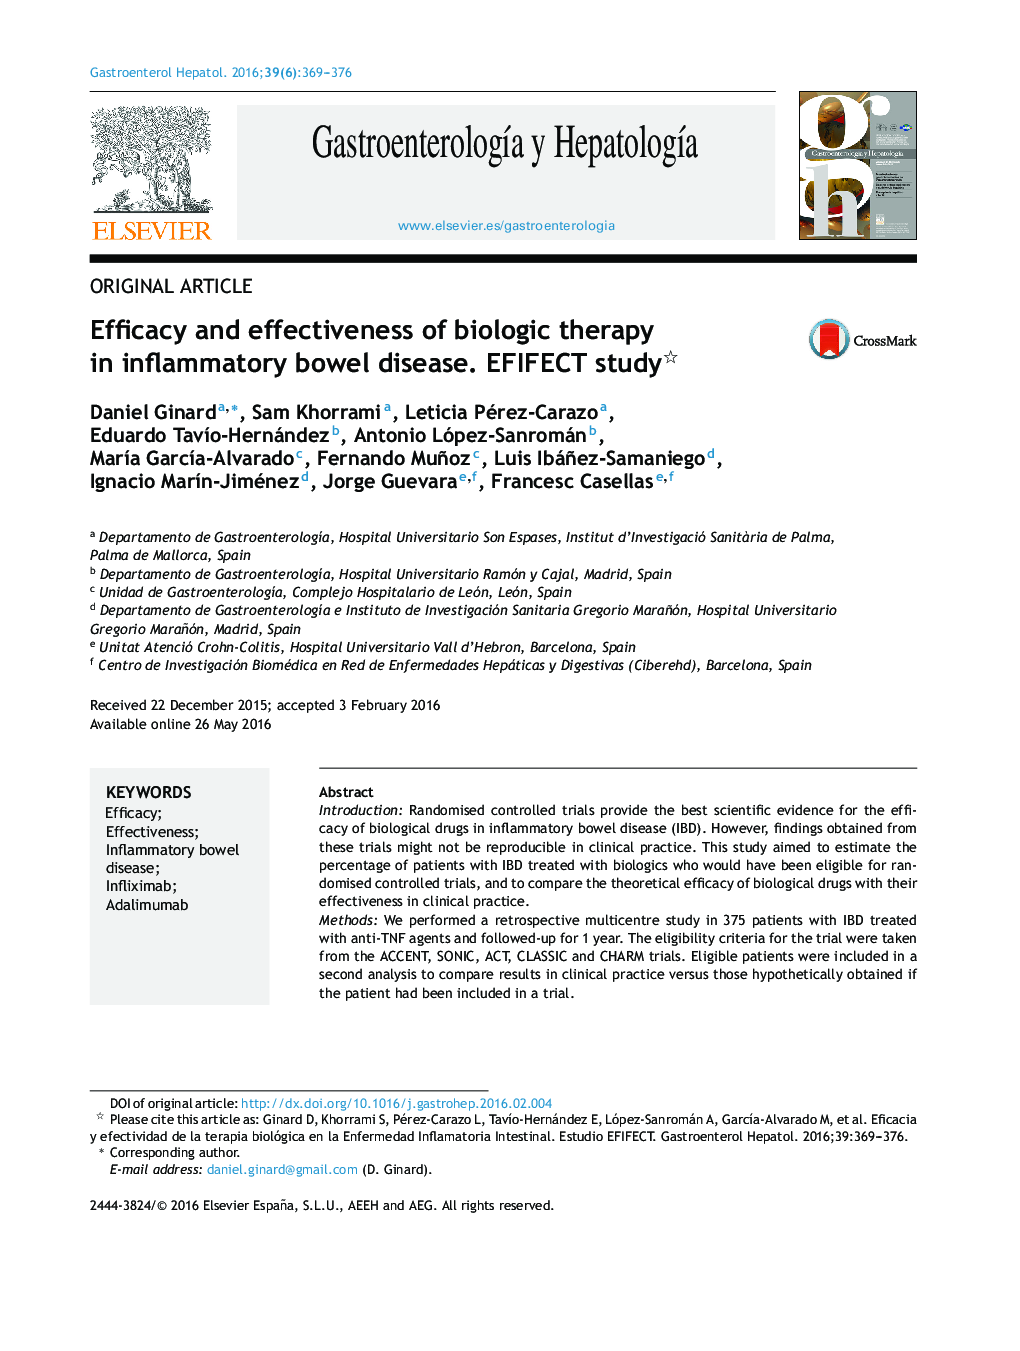 Efficacy and effectiveness of biologic therapy in inflammatory bowel disease. EFIFECT study 